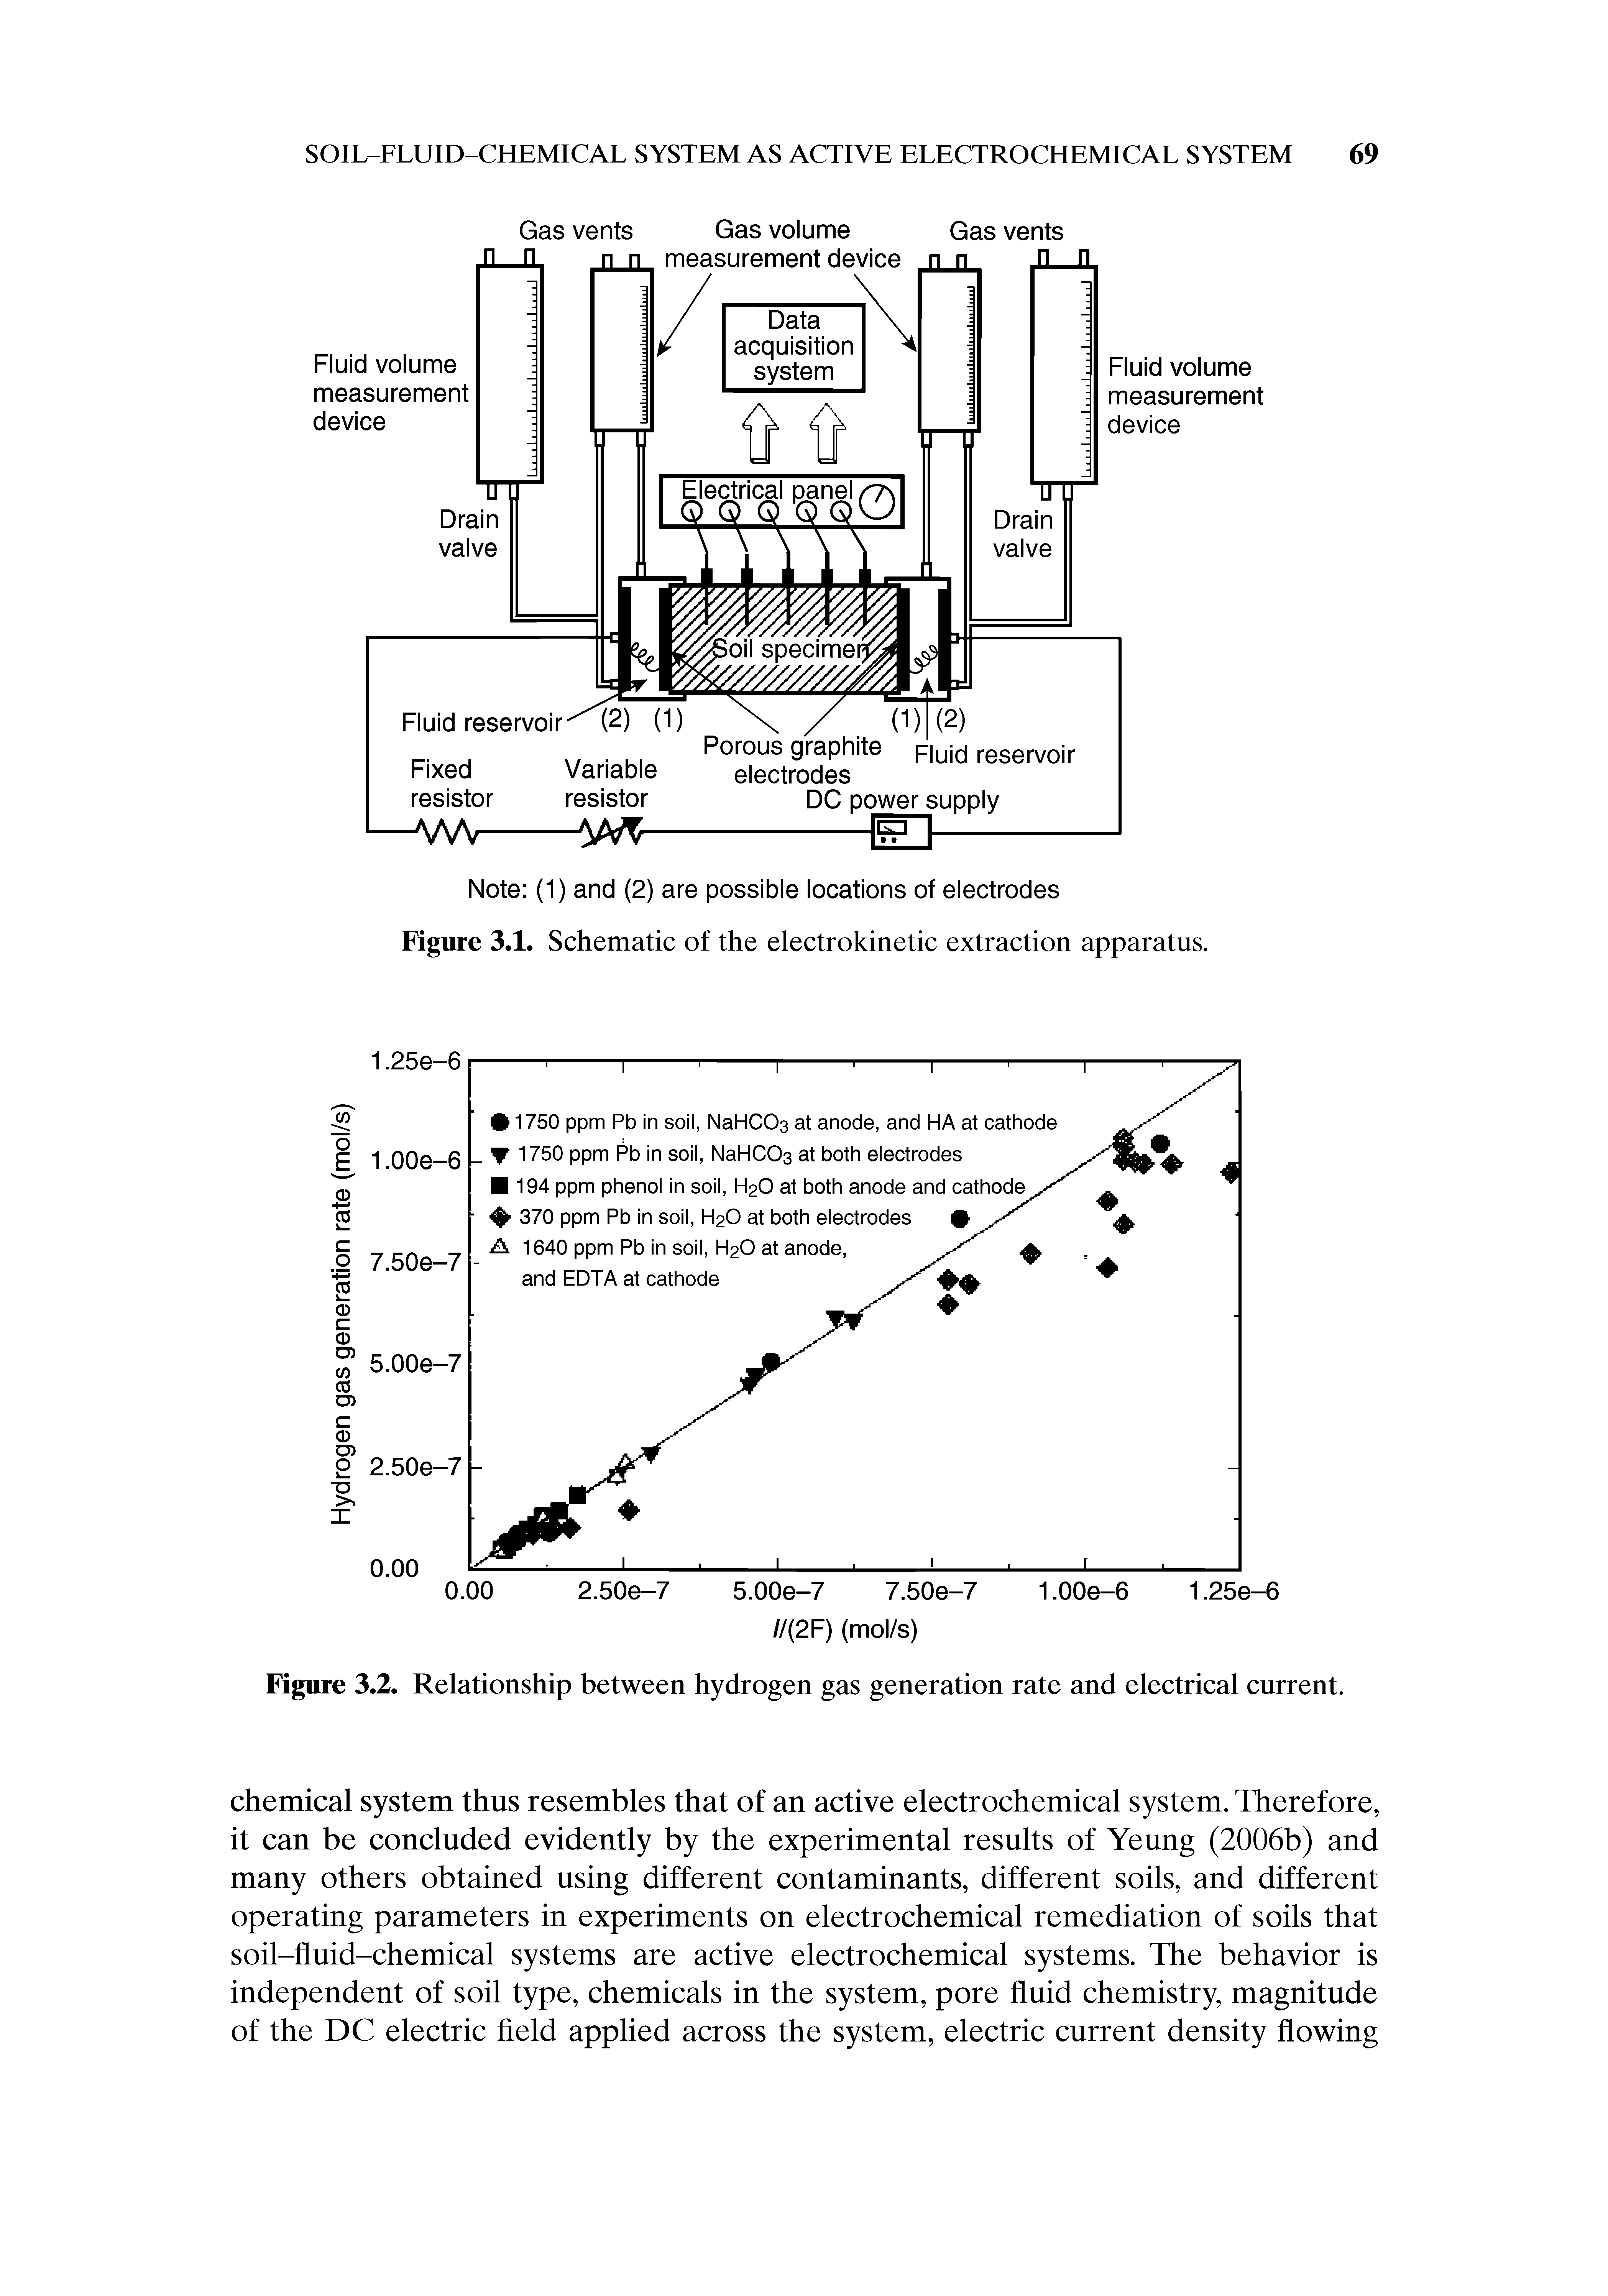 Figure 3.2. Relationship between hydrogen gas generation rate and electrical current.